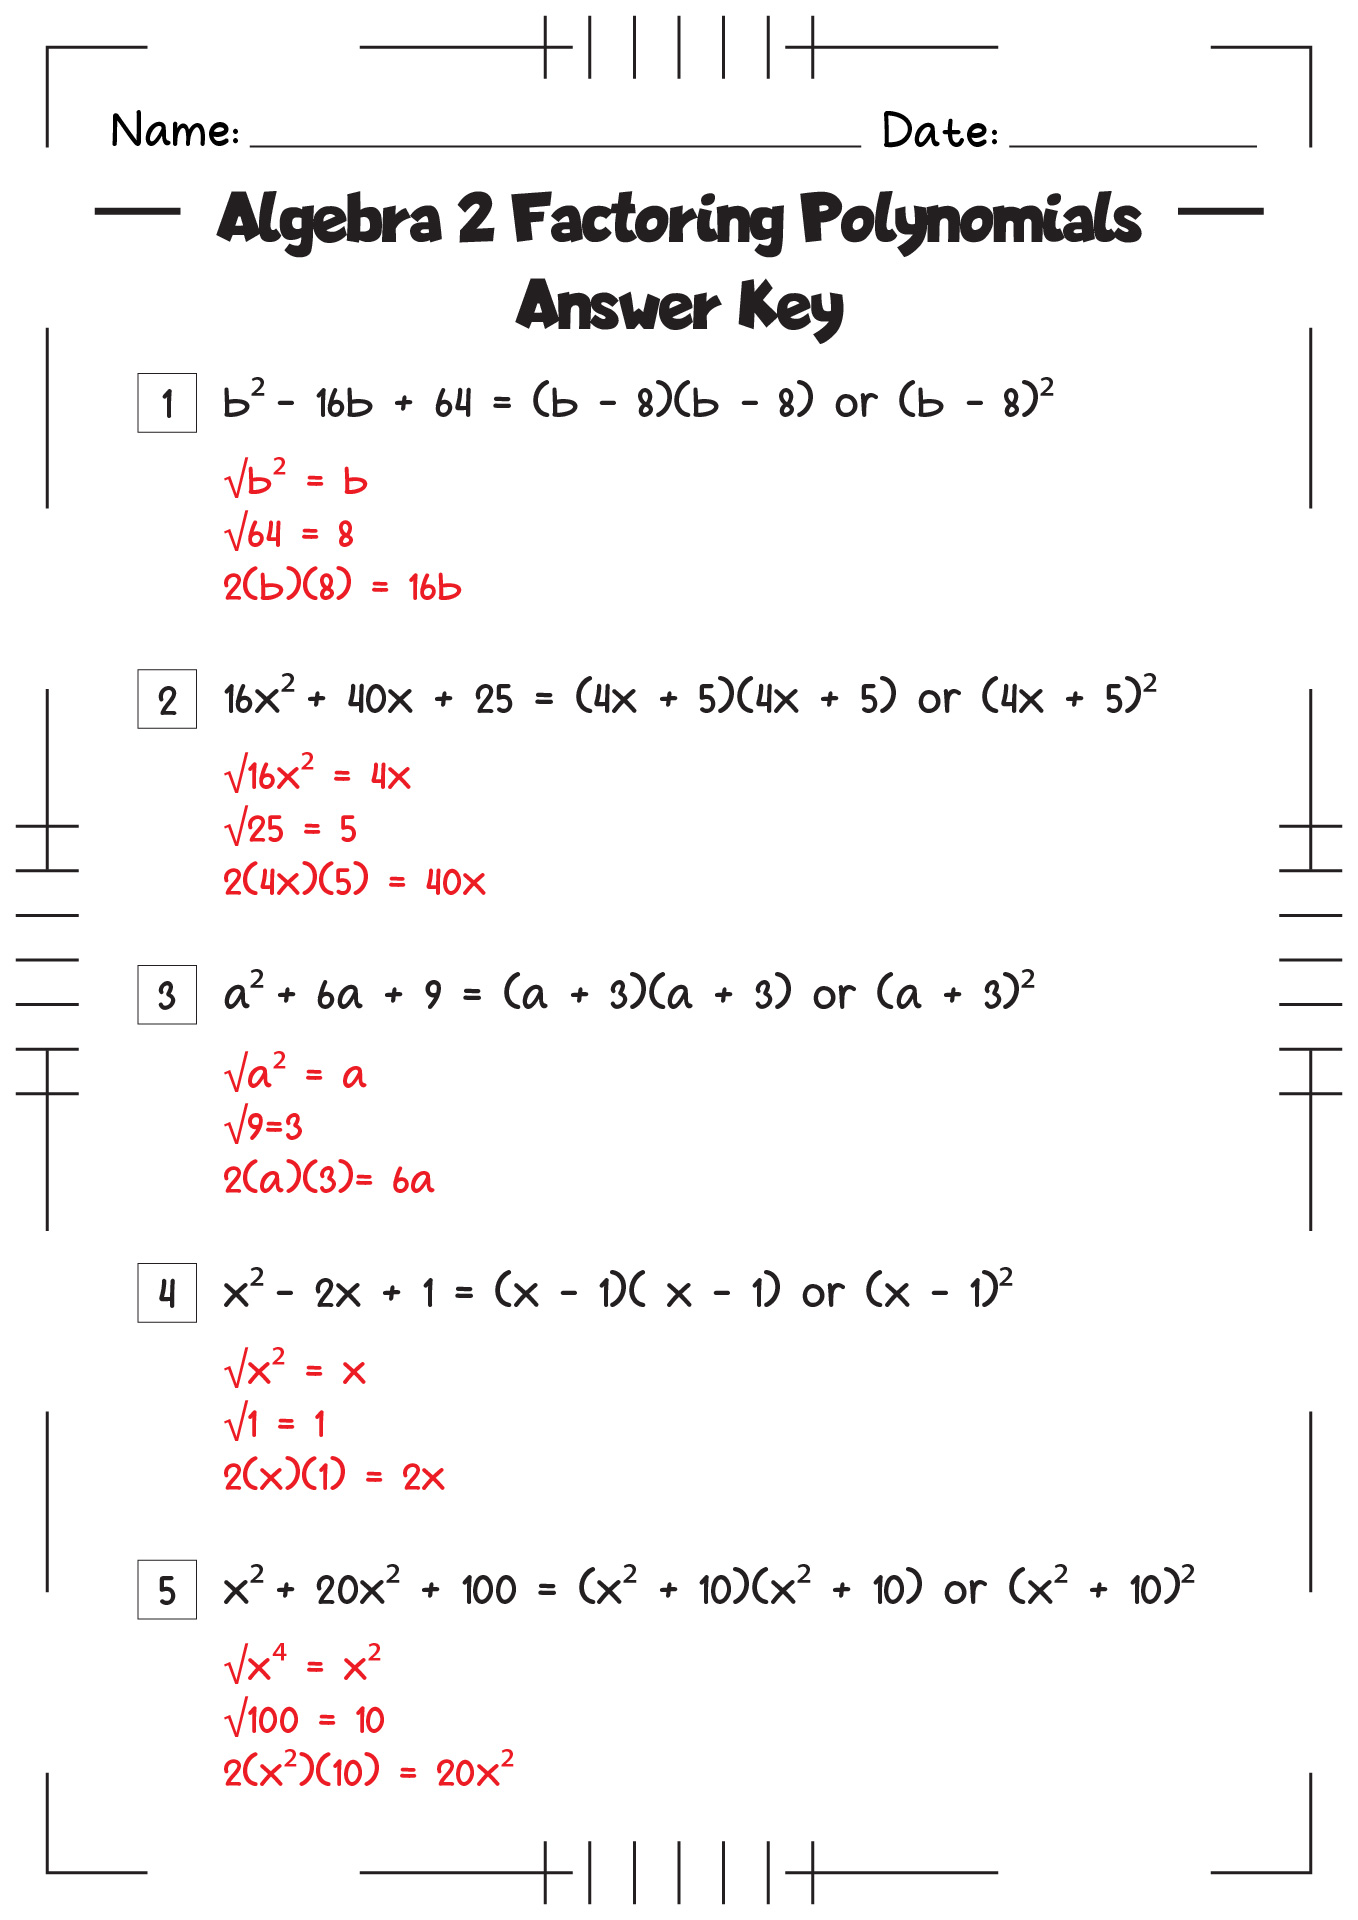 Algebra 2 Factoring Polynomials Worksheet with Answers